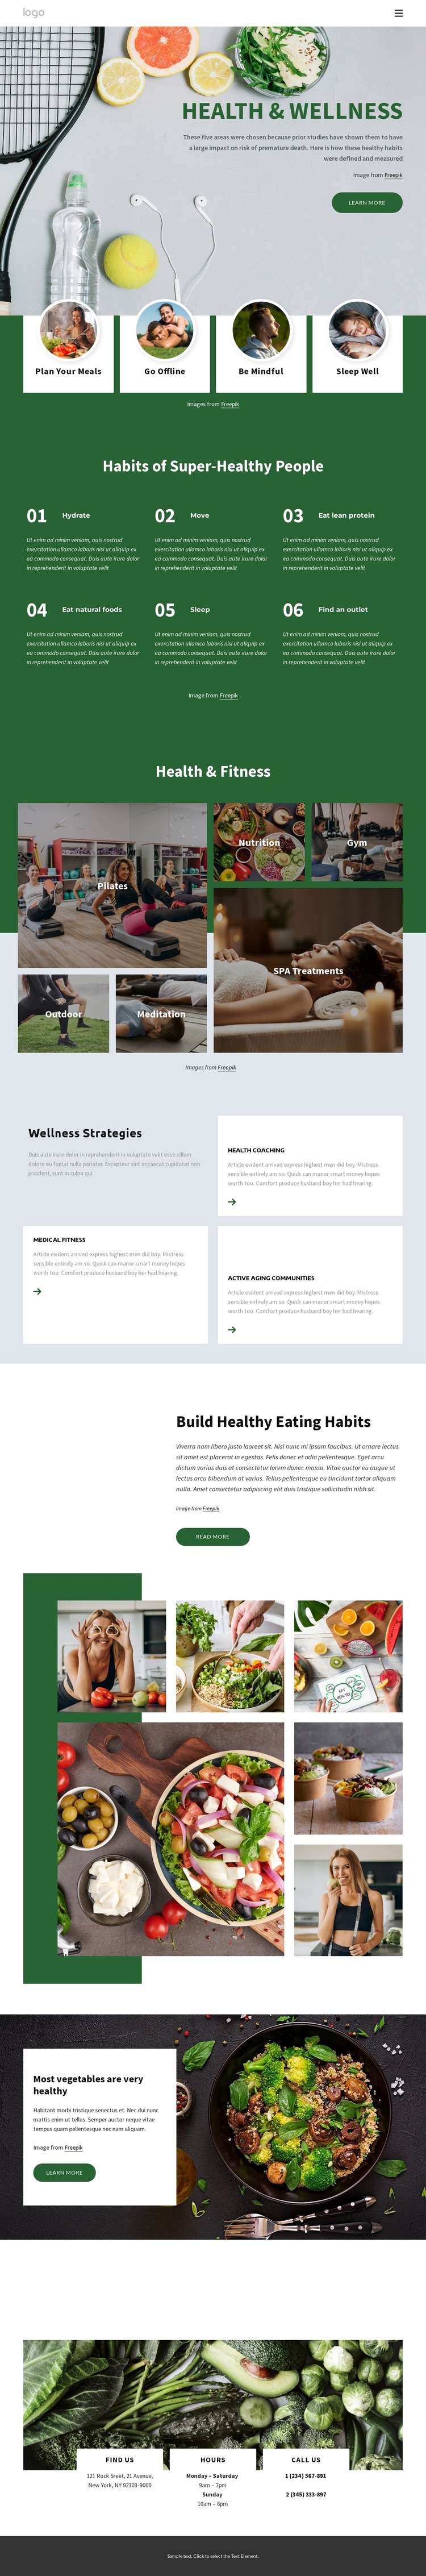 Health and wellness center Homepage Design